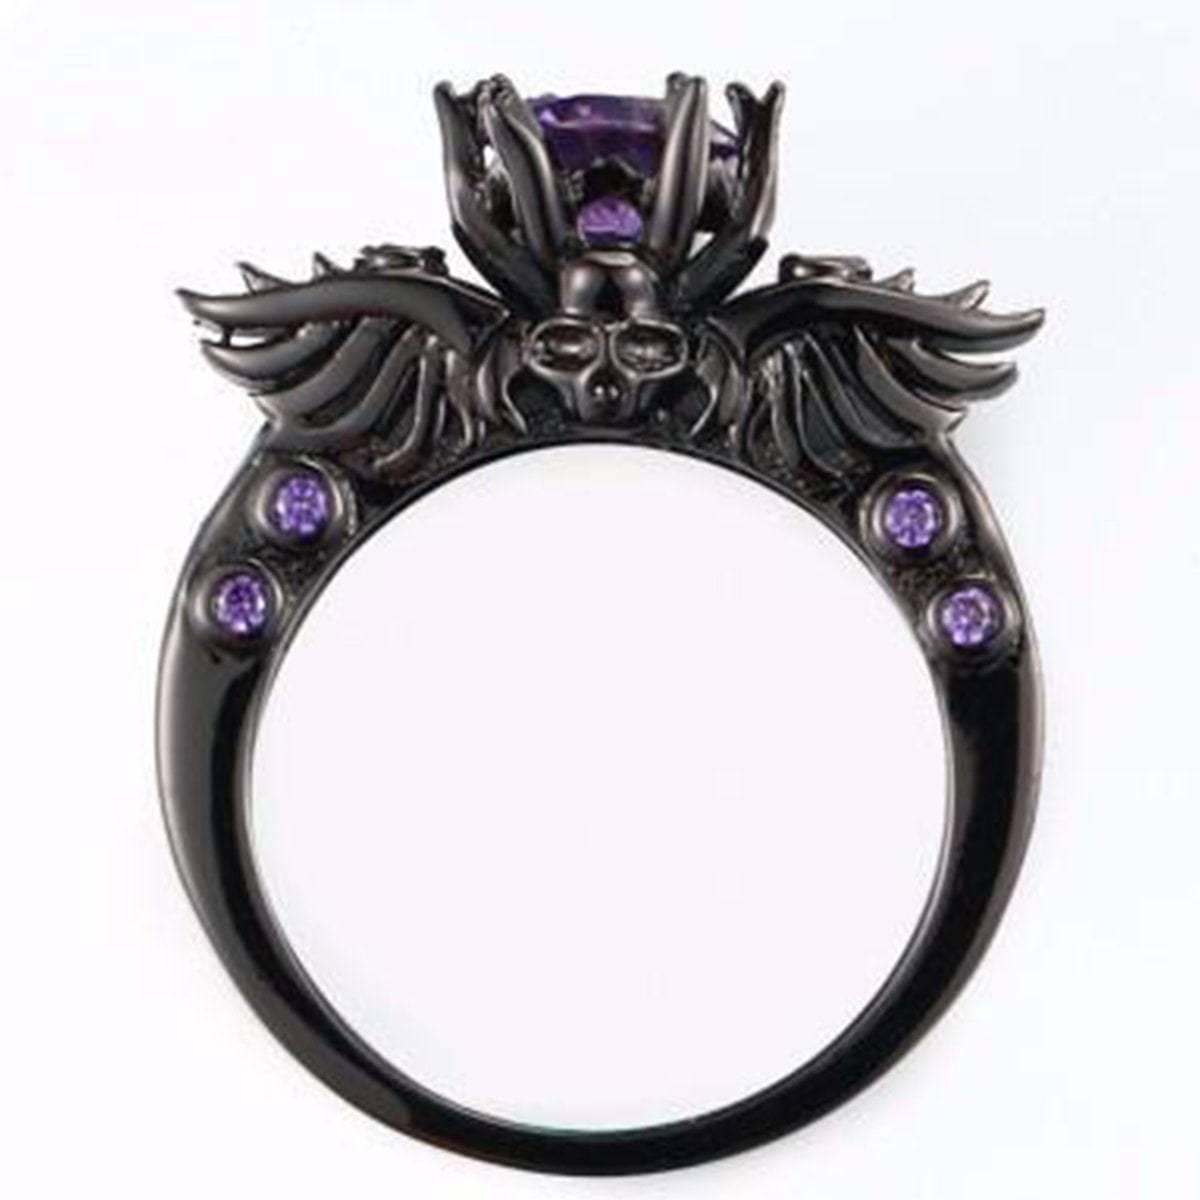 A Vintage Skull Shaped Ring with wings and purple stones.